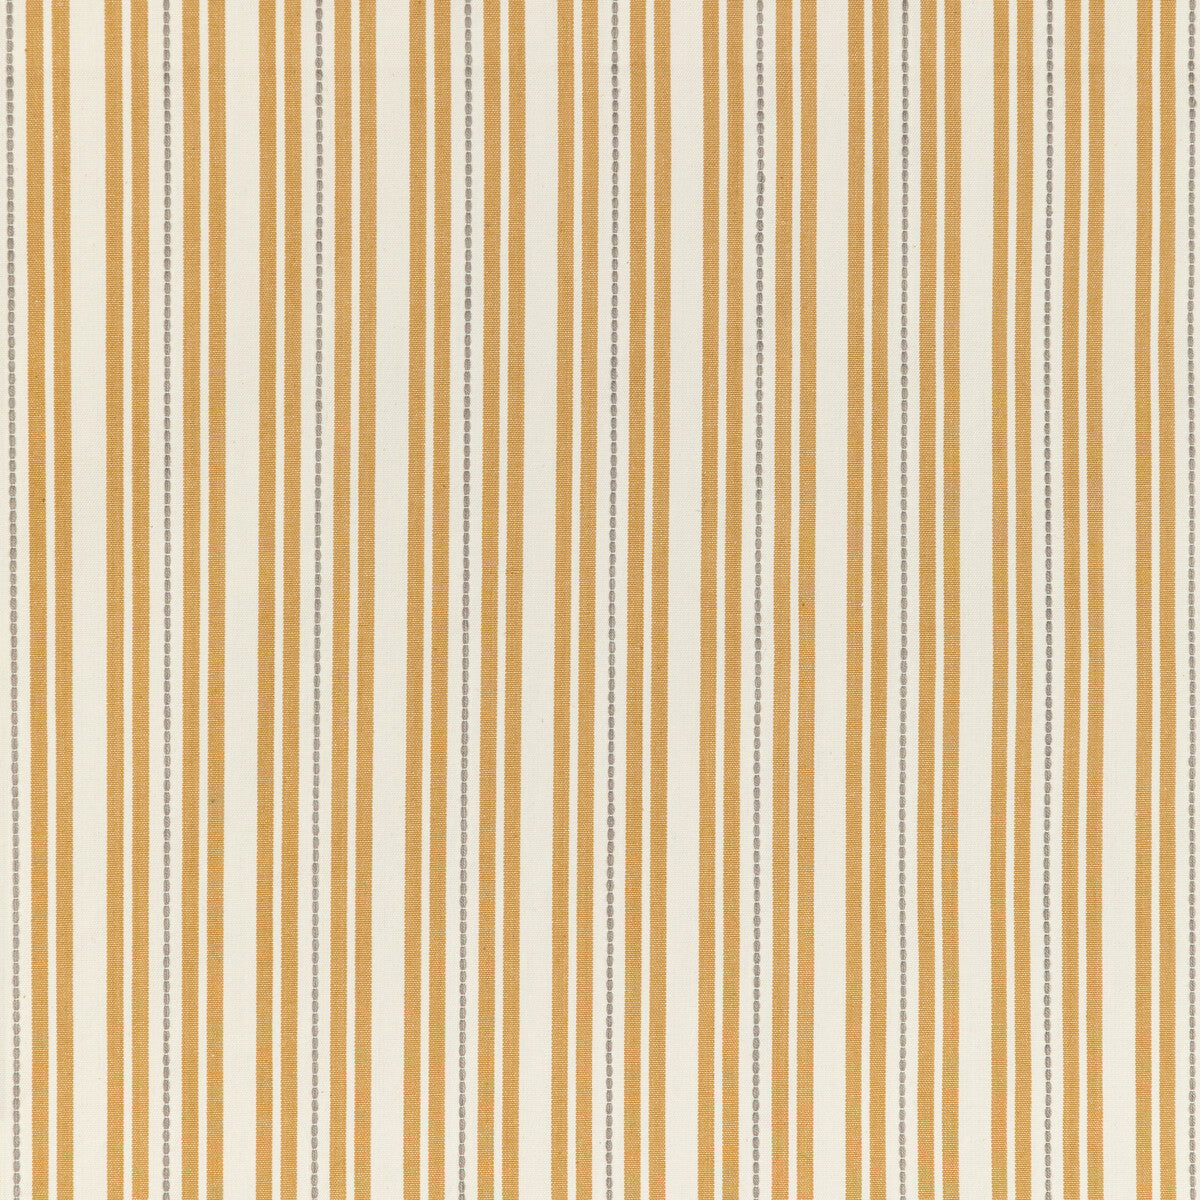 Basics fabric in 36046-40 color - pattern 36046.40.0 - by Kravet Basics in the L&